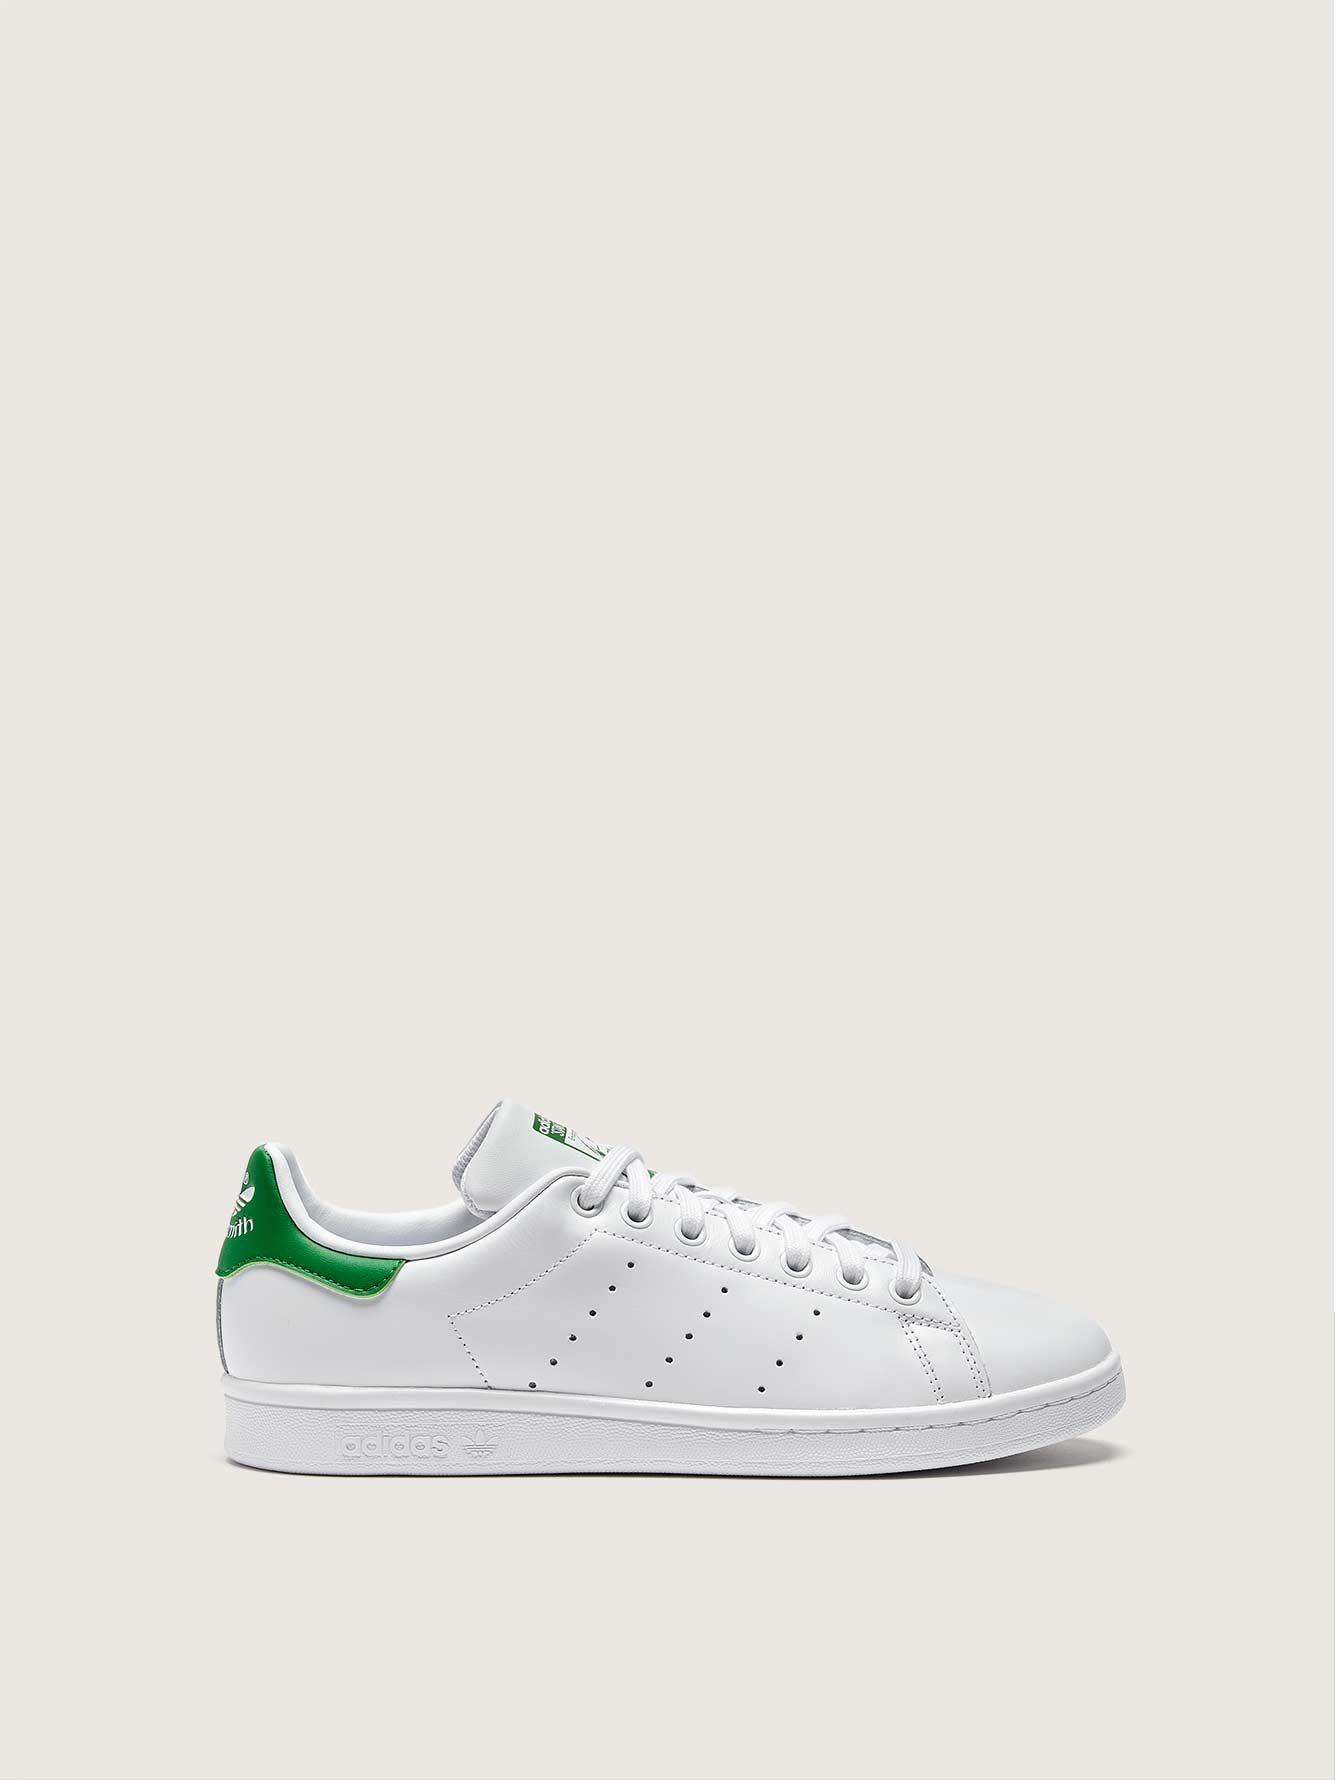 Wide Stan Smith Sneaker - Adidas 